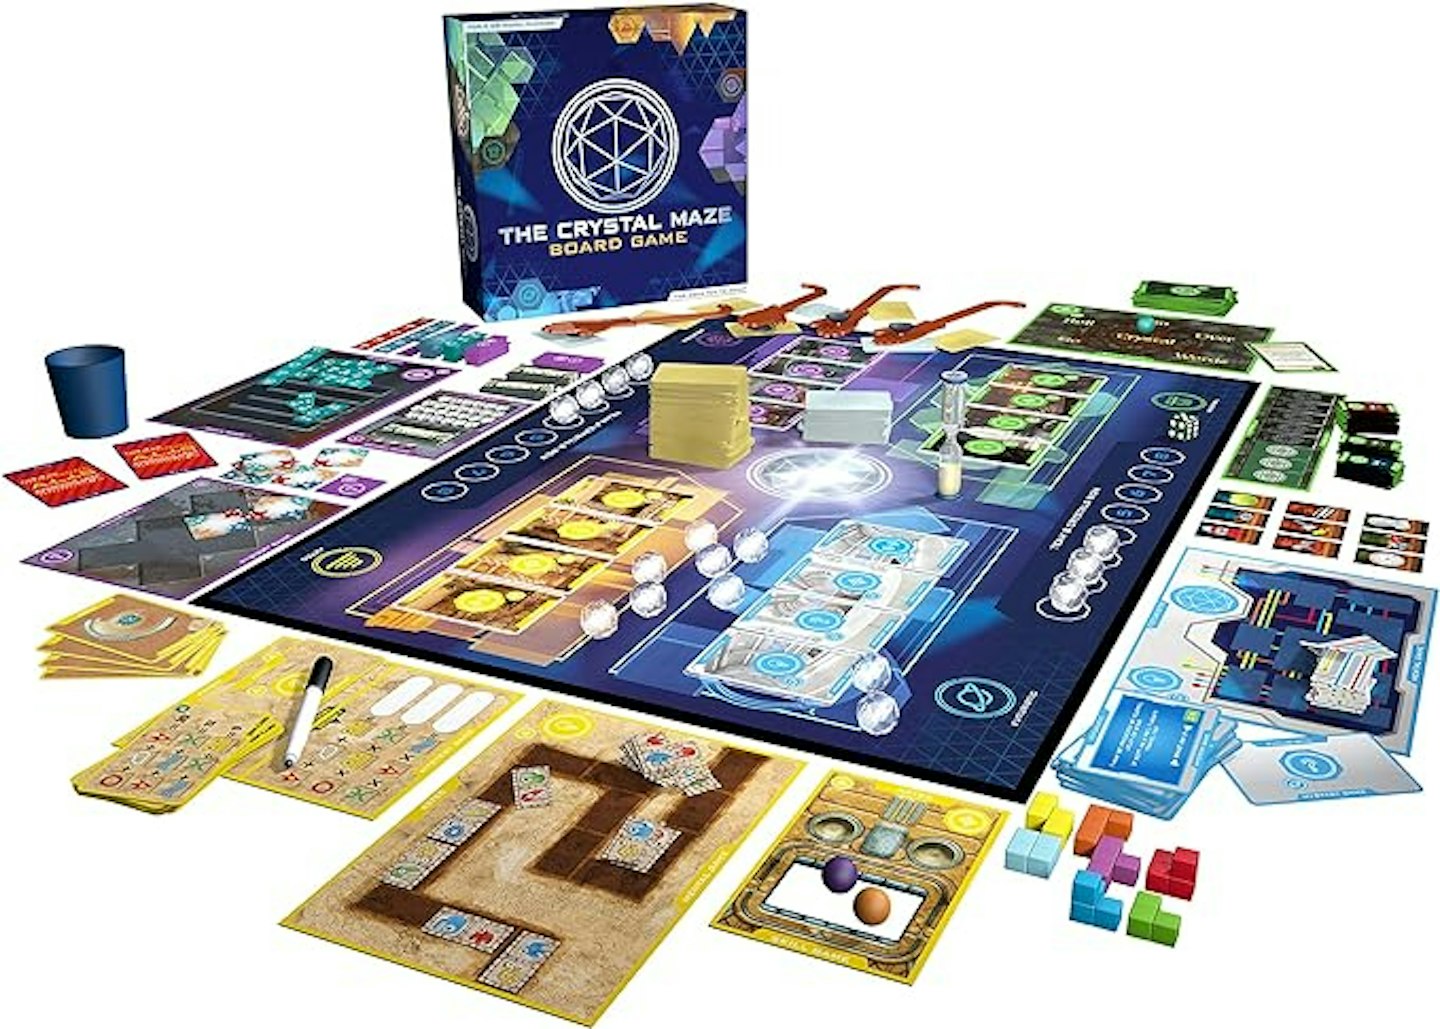 Crystal Maze board game box and contents